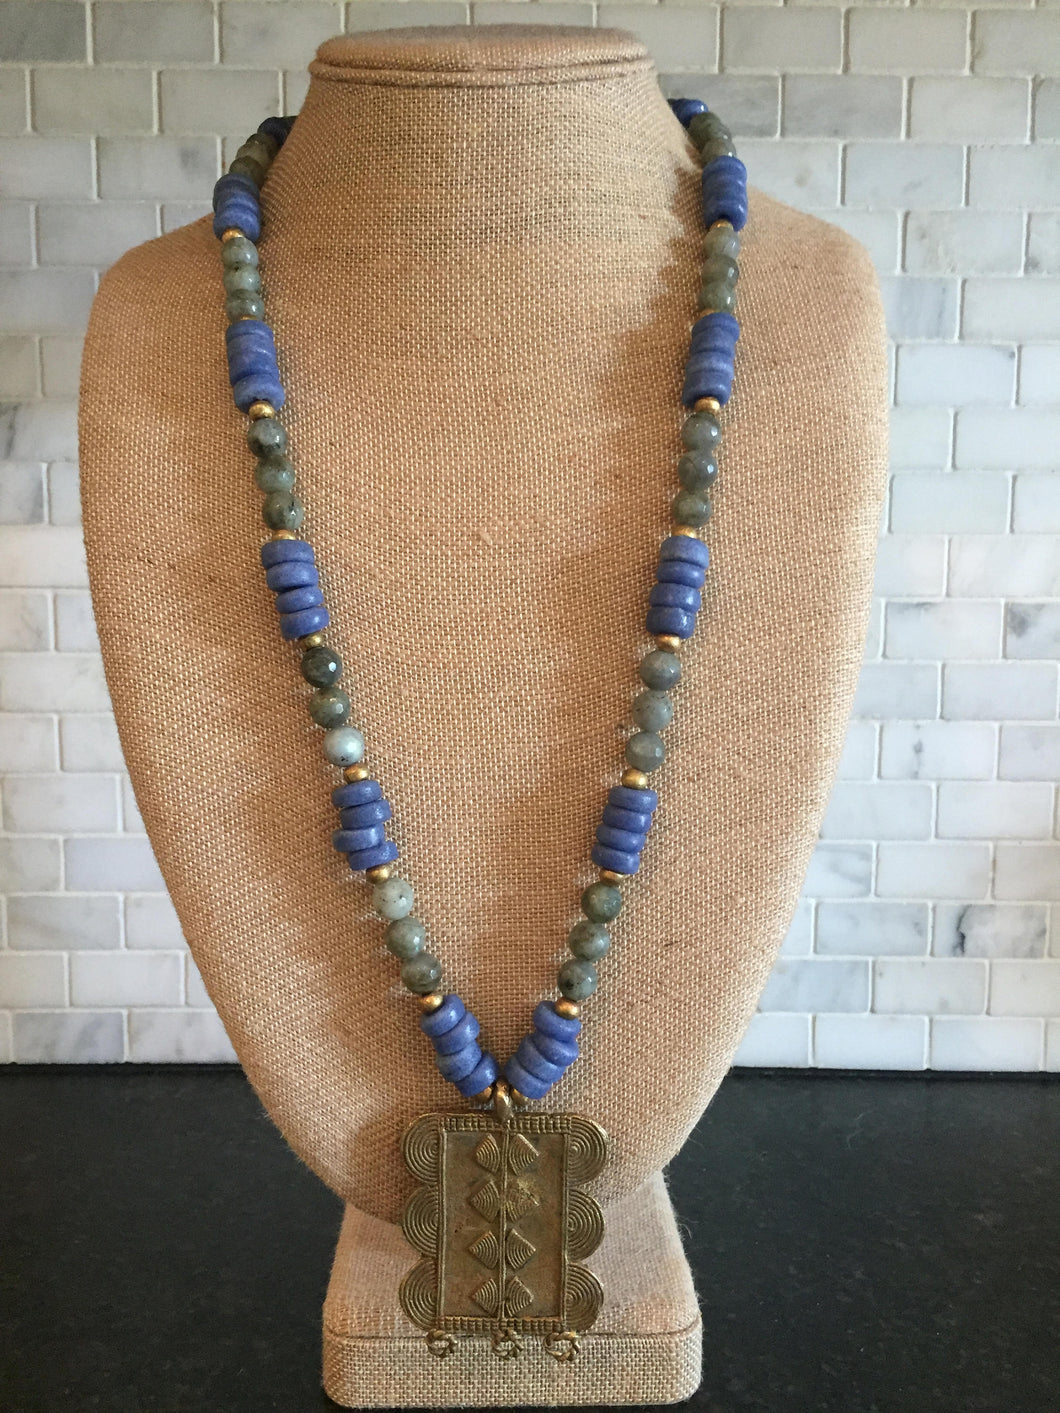 Labradorite and African glass beaded necklace with brass pendant